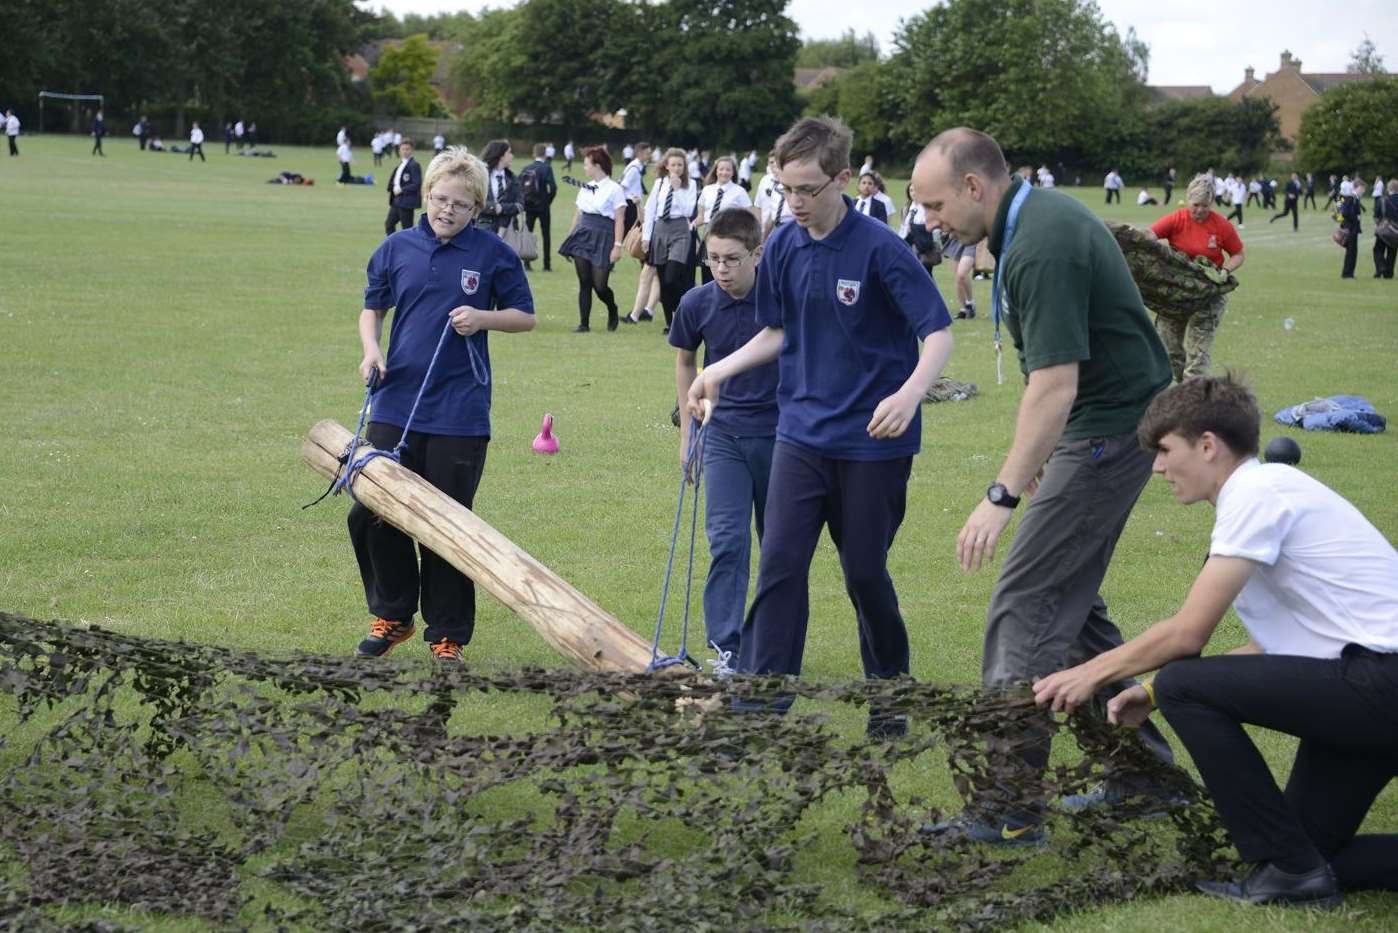 Westlands School Iron Man challenge with Year 7 and 8 pupils grabbing a log and dragging it under three cargo nets